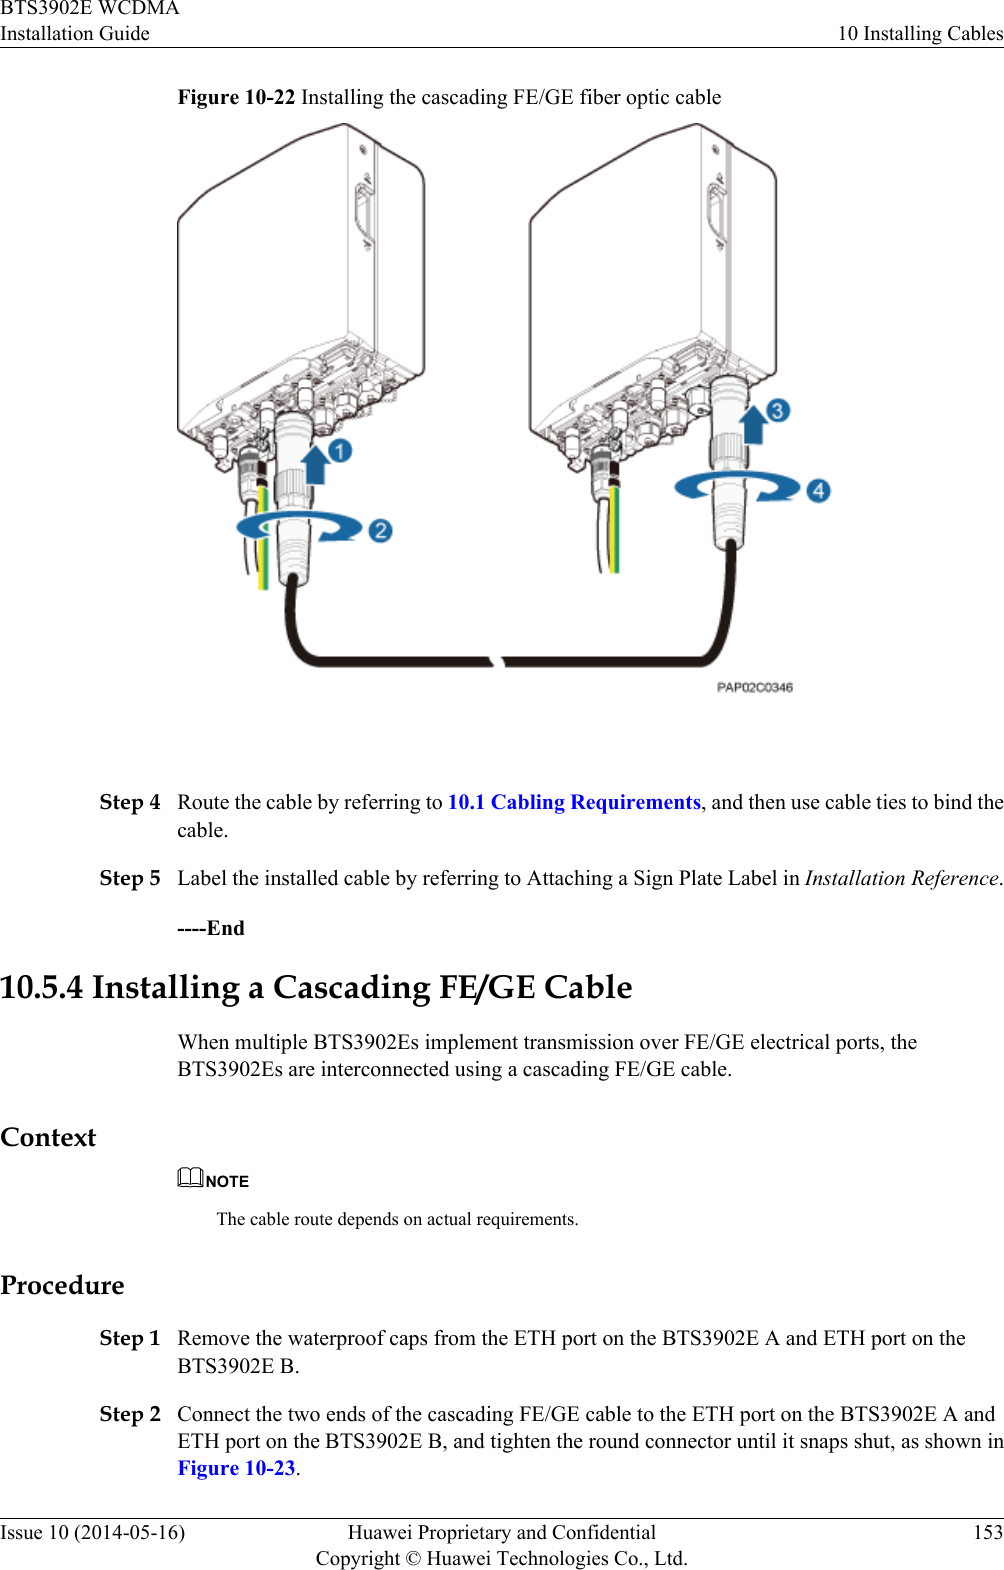 Figure 10-22 Installing the cascading FE/GE fiber optic cable Step 4 Route the cable by referring to 10.1 Cabling Requirements, and then use cable ties to bind thecable.Step 5 Label the installed cable by referring to Attaching a Sign Plate Label in Installation Reference.----End10.5.4 Installing a Cascading FE/GE CableWhen multiple BTS3902Es implement transmission over FE/GE electrical ports, theBTS3902Es are interconnected using a cascading FE/GE cable.ContextNOTEThe cable route depends on actual requirements.ProcedureStep 1 Remove the waterproof caps from the ETH port on the BTS3902E A and ETH port on theBTS3902E B.Step 2 Connect the two ends of the cascading FE/GE cable to the ETH port on the BTS3902E A andETH port on the BTS3902E B, and tighten the round connector until it snaps shut, as shown inFigure 10-23.BTS3902E WCDMAInstallation Guide 10 Installing CablesIssue 10 (2014-05-16) Huawei Proprietary and ConfidentialCopyright © Huawei Technologies Co., Ltd.153